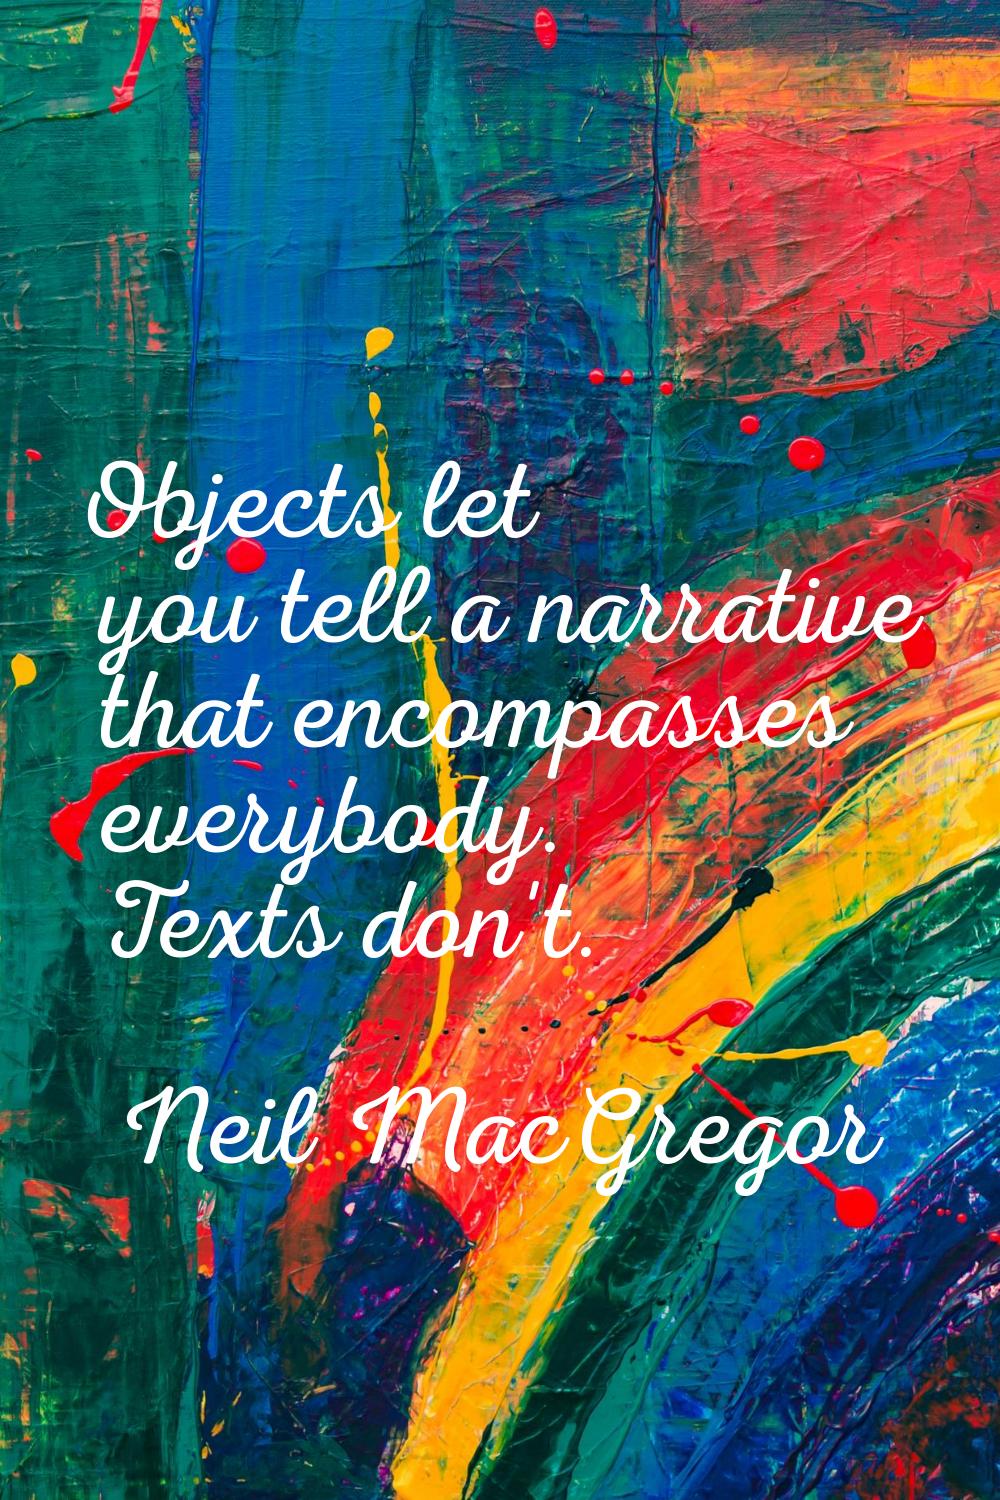 Objects let you tell a narrative that encompasses everybody. Texts don't.